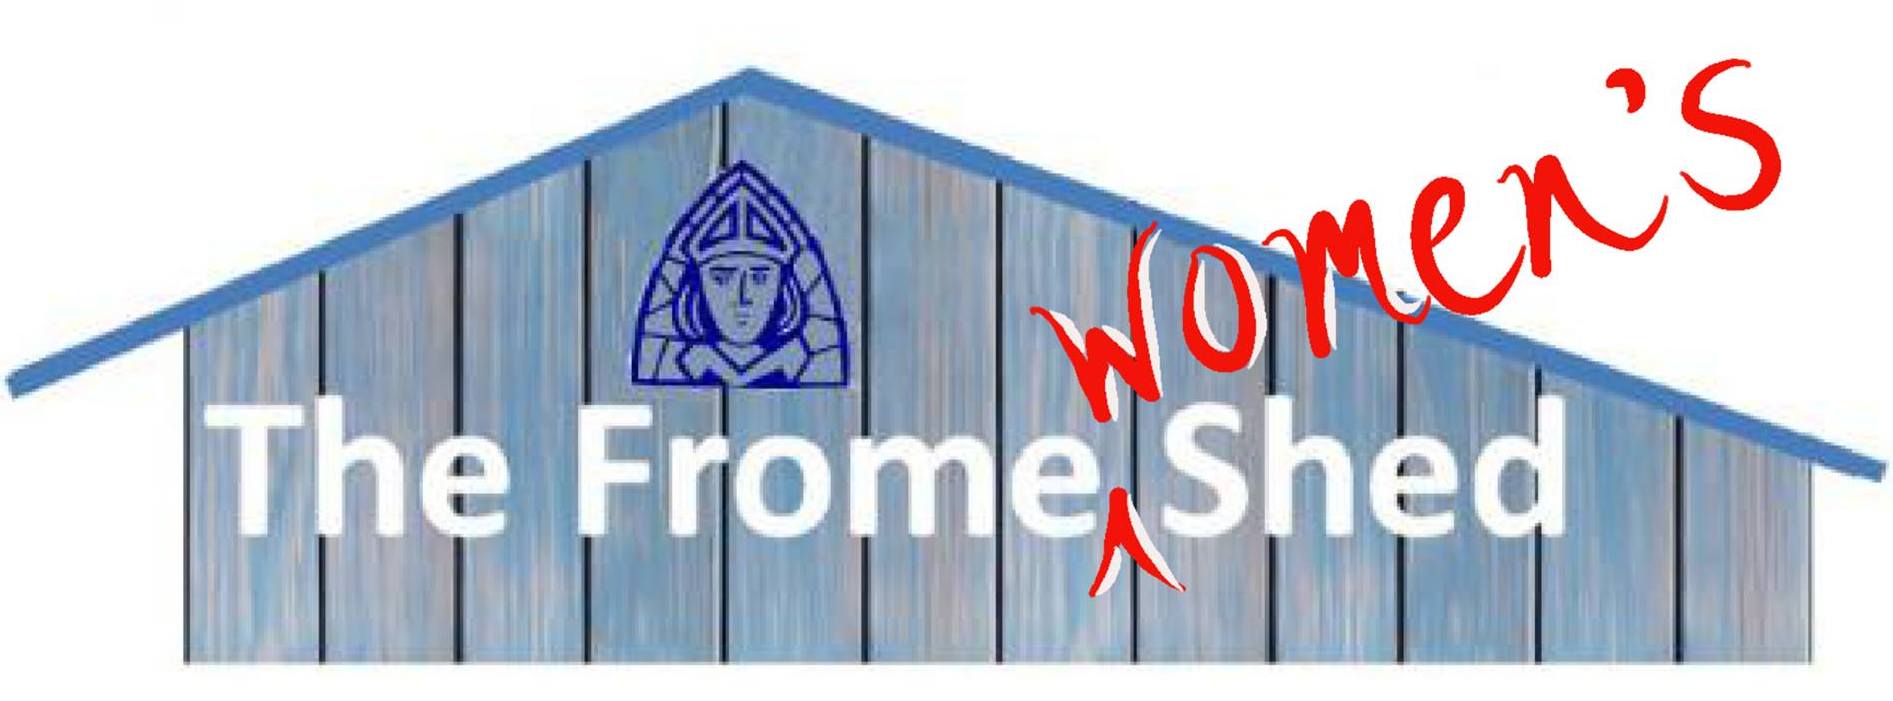 Frome Men's Shed Women's Shed?